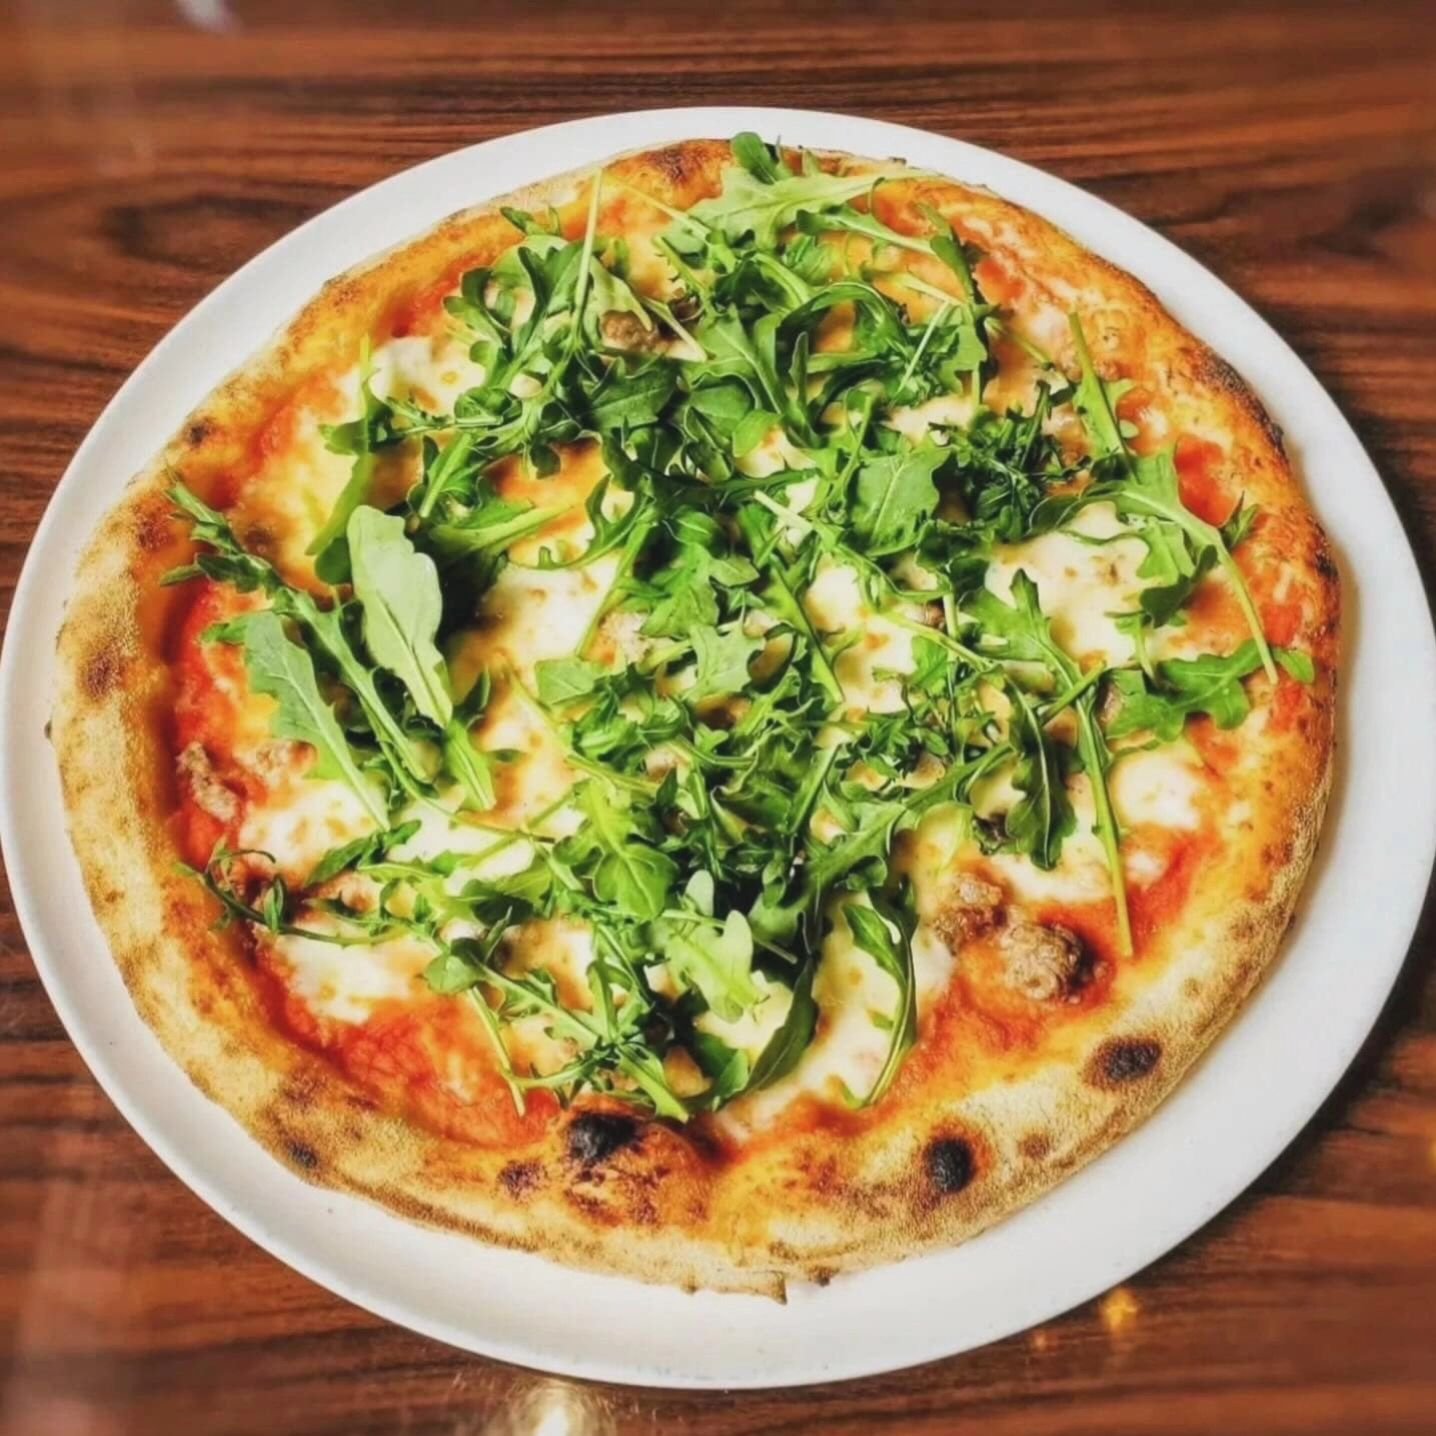 Stop by for lunch and try our arugula pizza featuring our house made sausage, arugula, mozzarella, and tomato sauce.

#italianpizza #pizzaria #pizzapizza #rucola #arugula #sausage #Lefresca #lefrescabhm #birminghamlunchspots #birminghamAlabama #downt